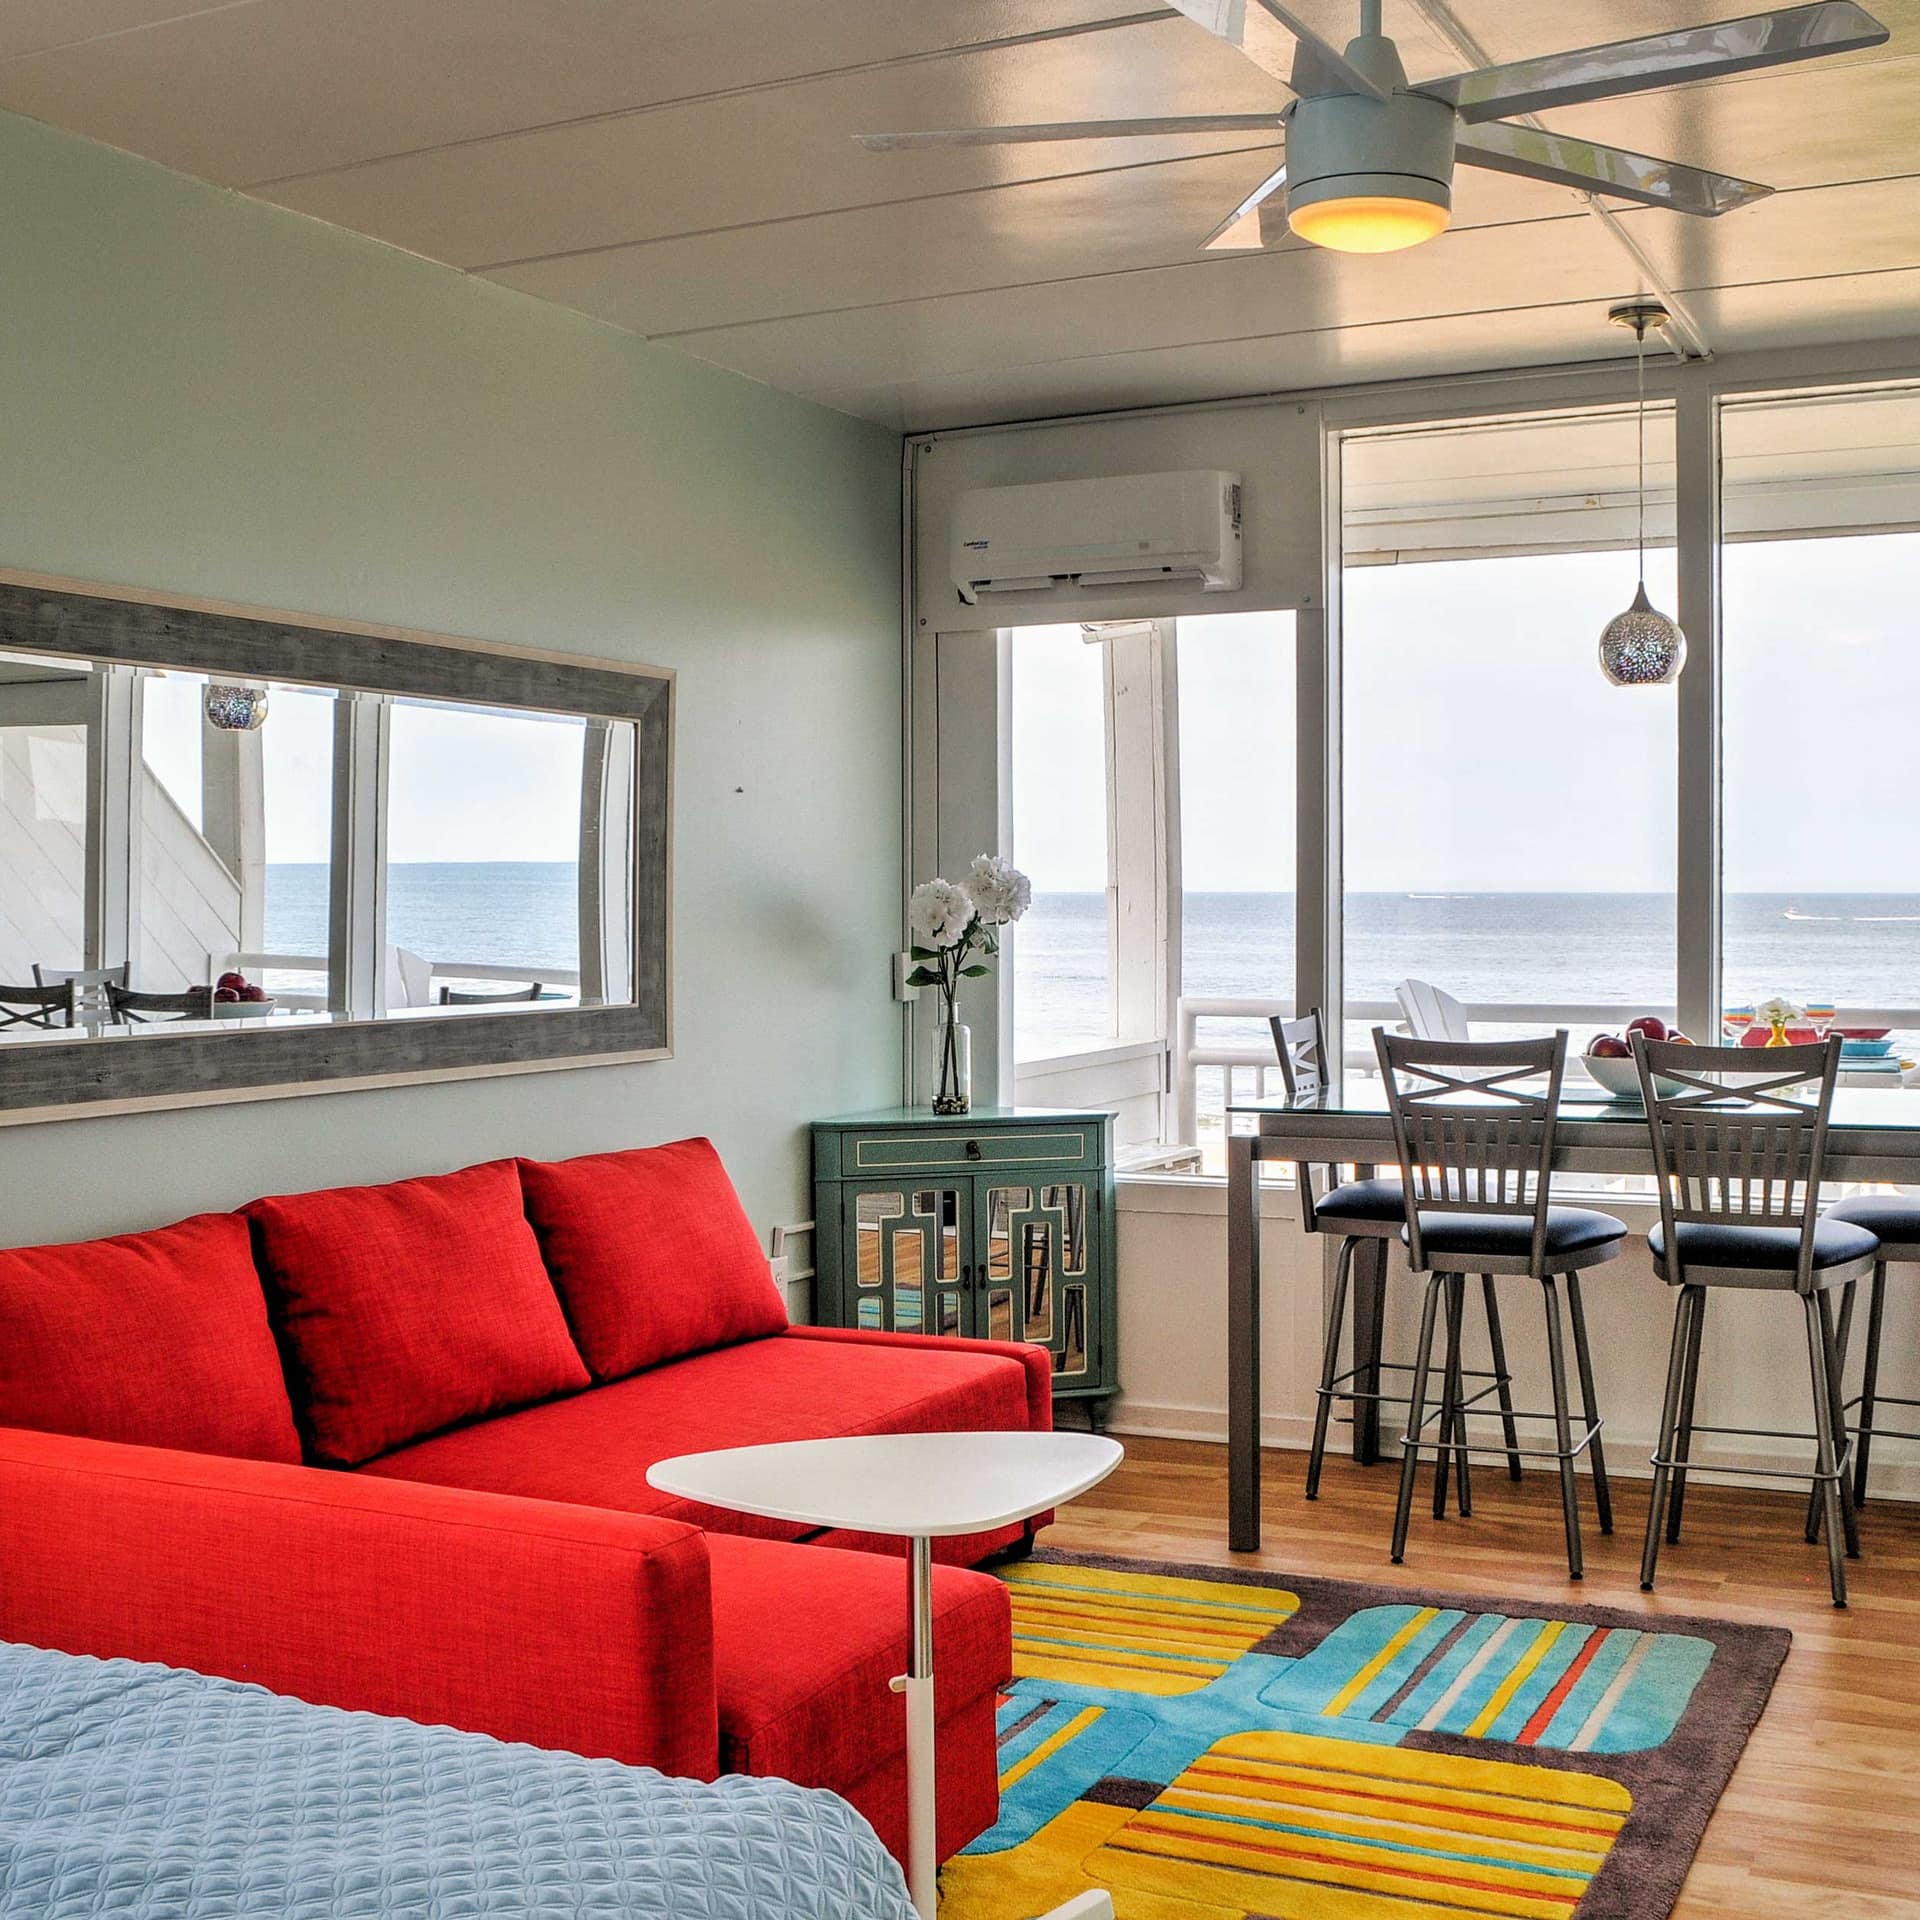 The colorful interior of a condo with beach view